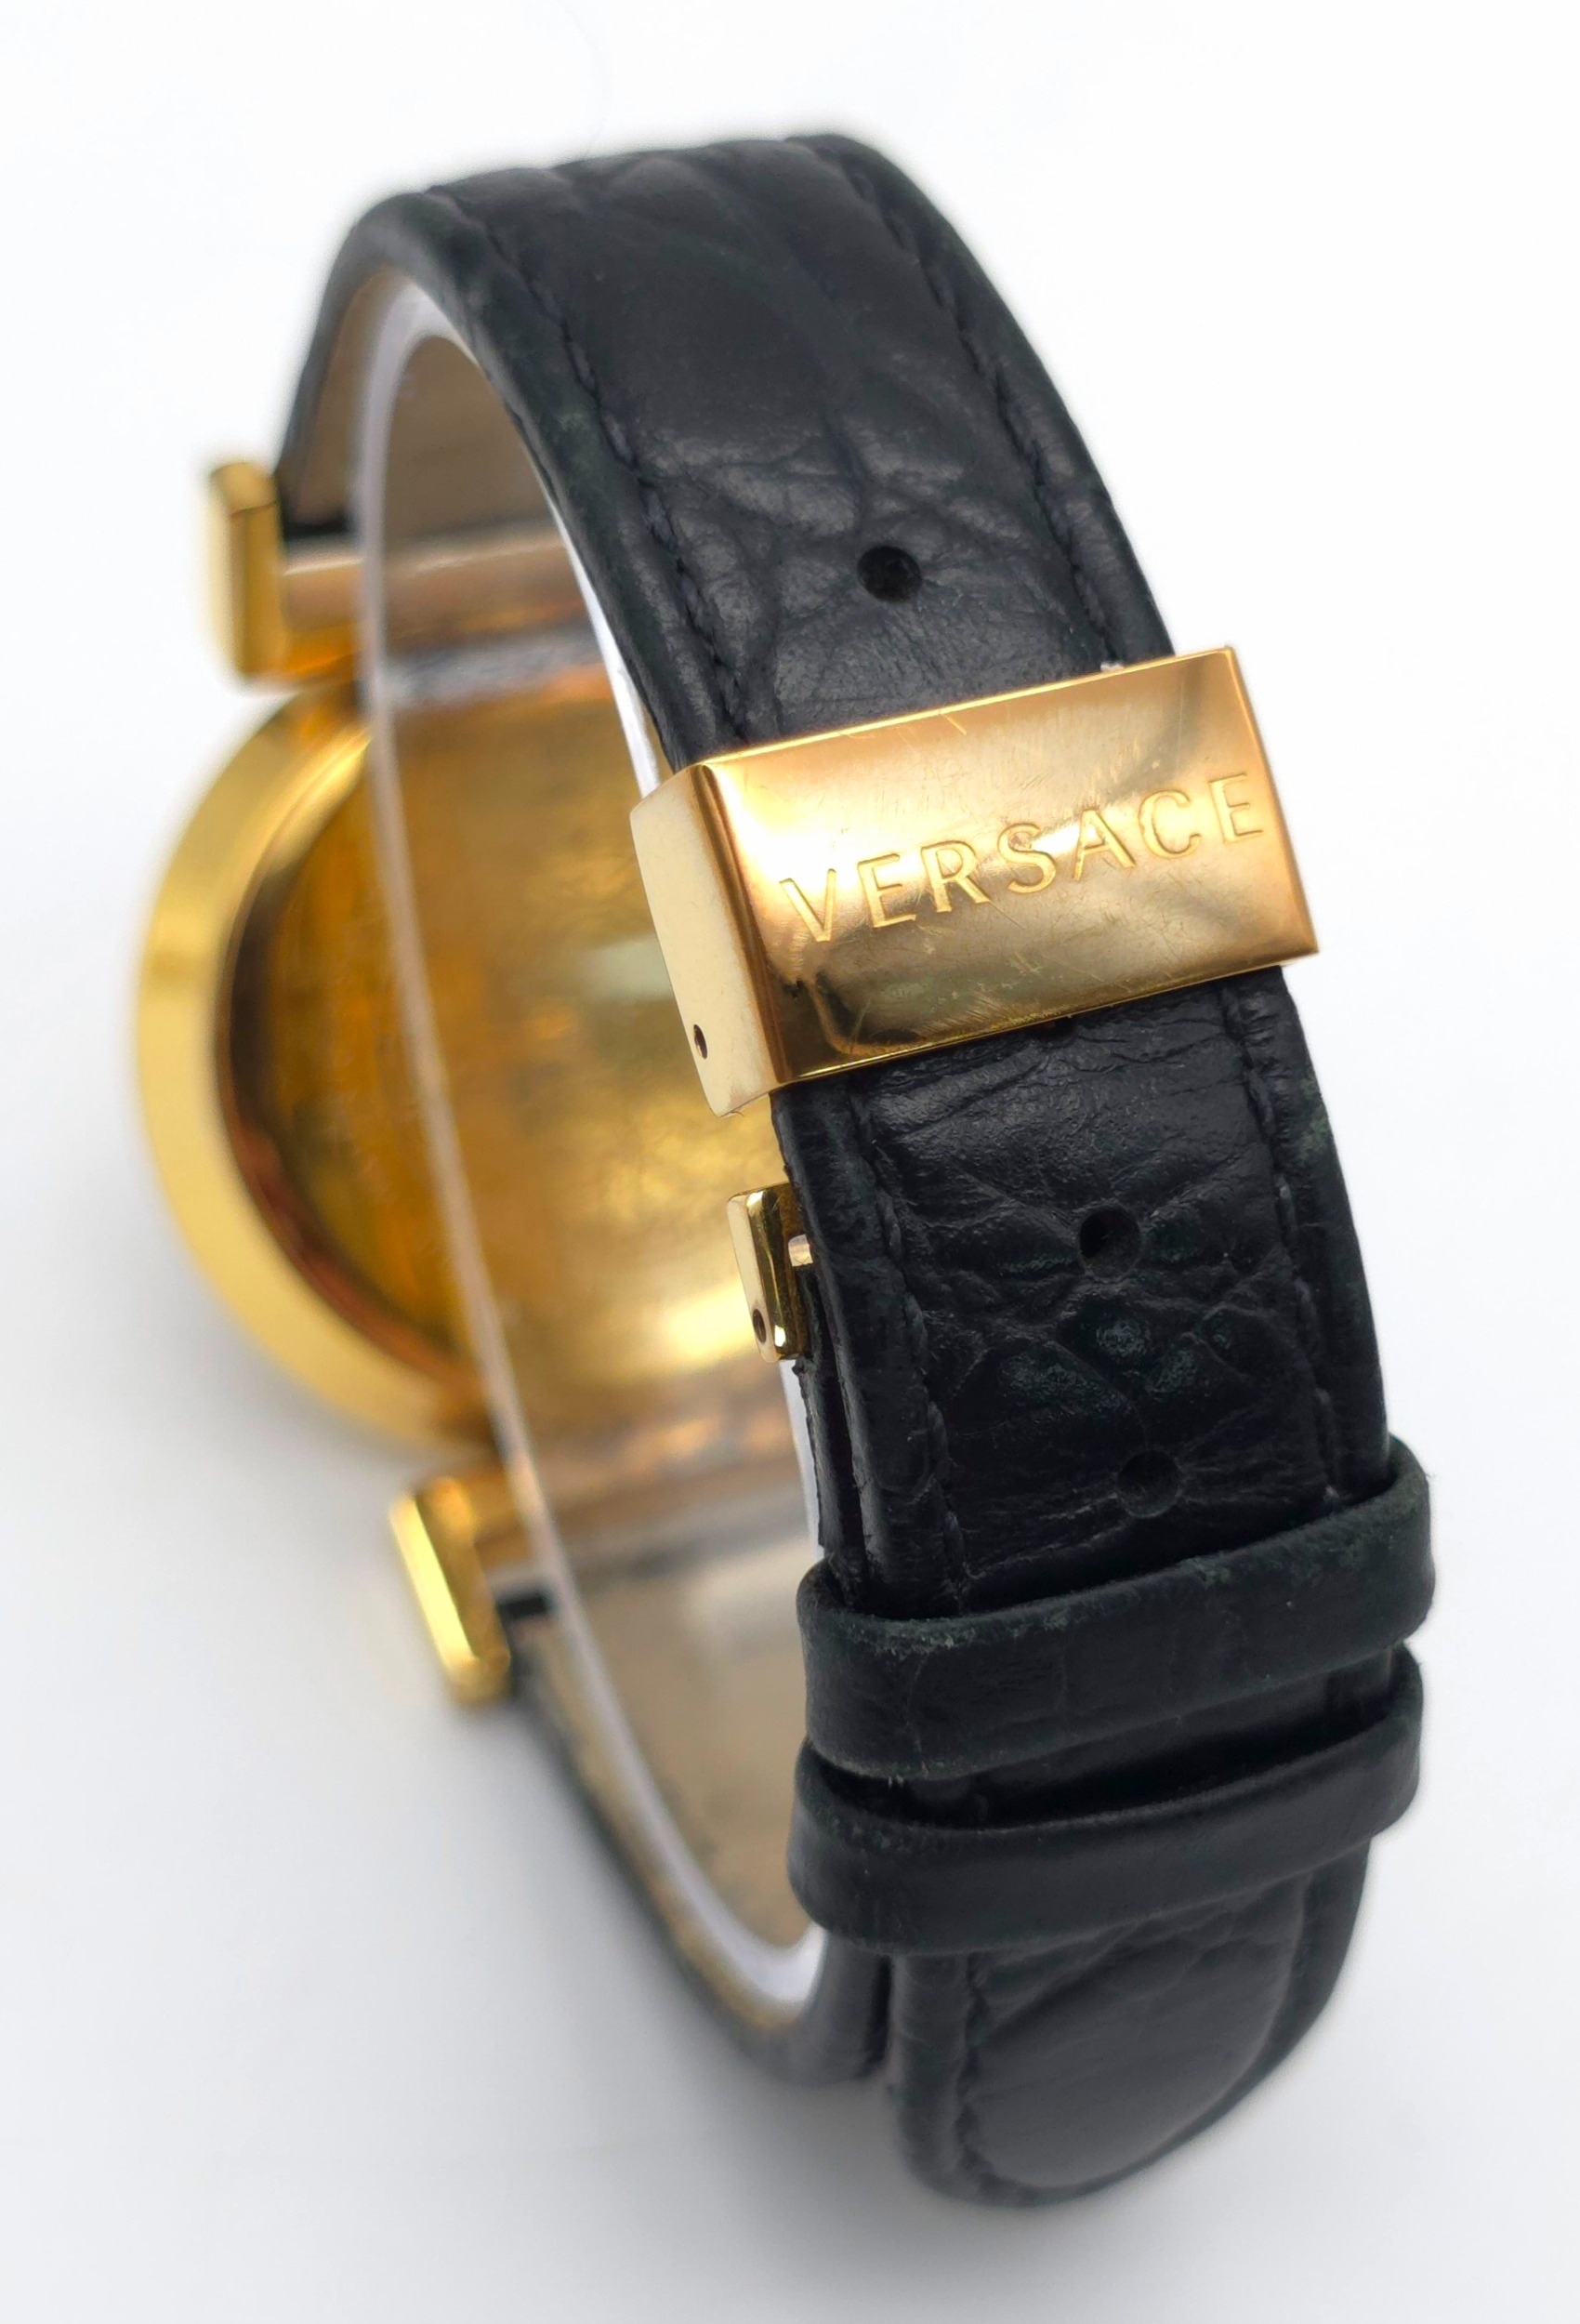 A Versace Designer Quartz Ladies Watch. Black leather and gilded strap and case - 35mm. Black dial - Image 5 of 8